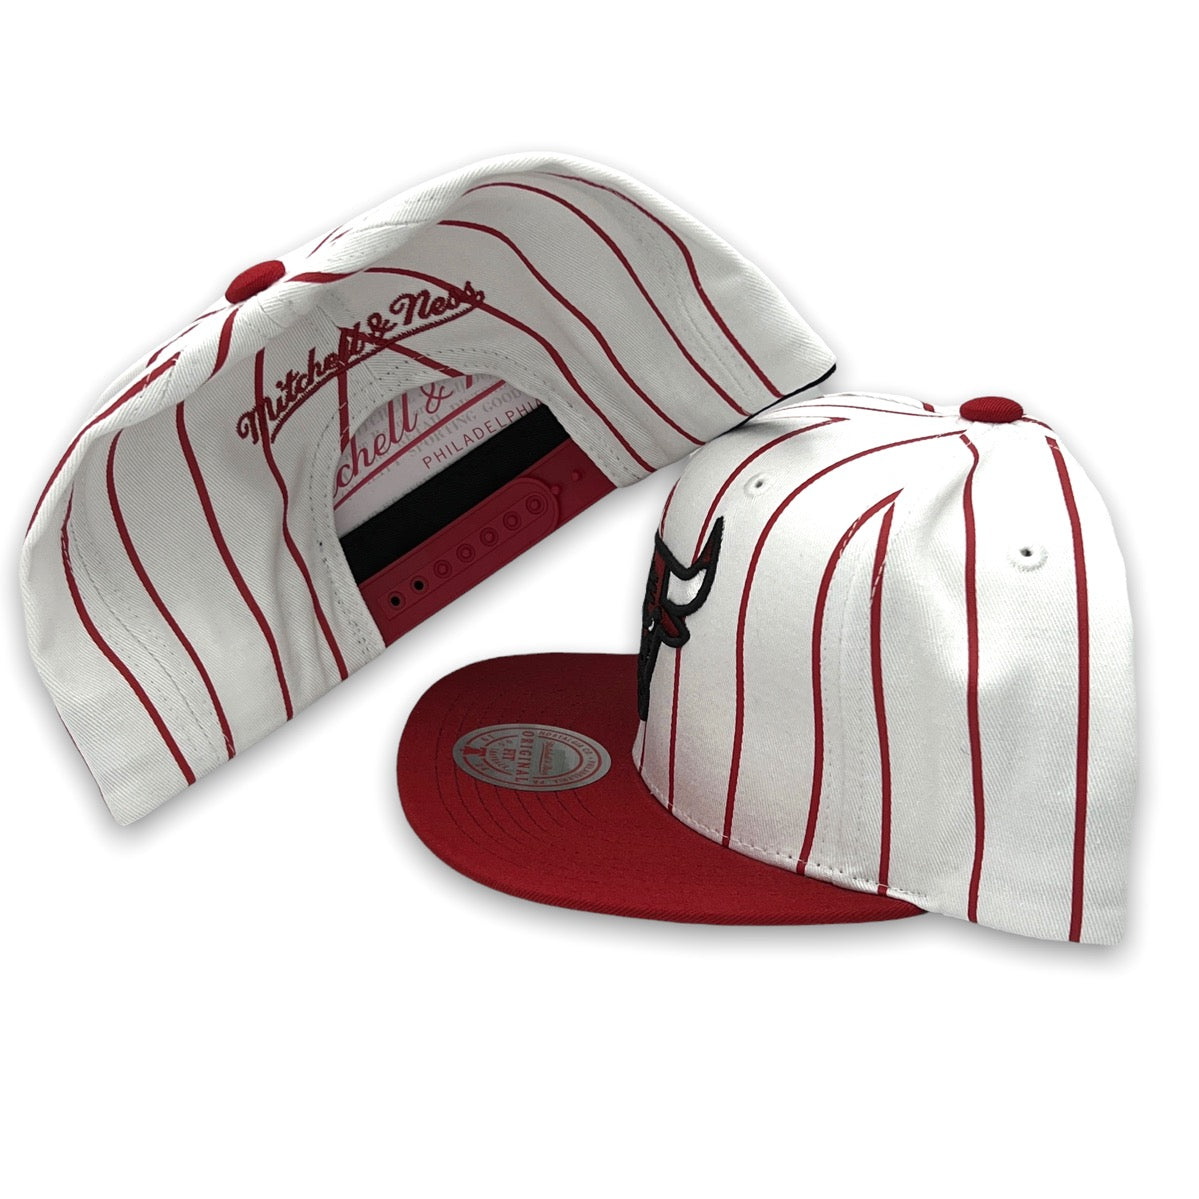 red and white bulls snapback